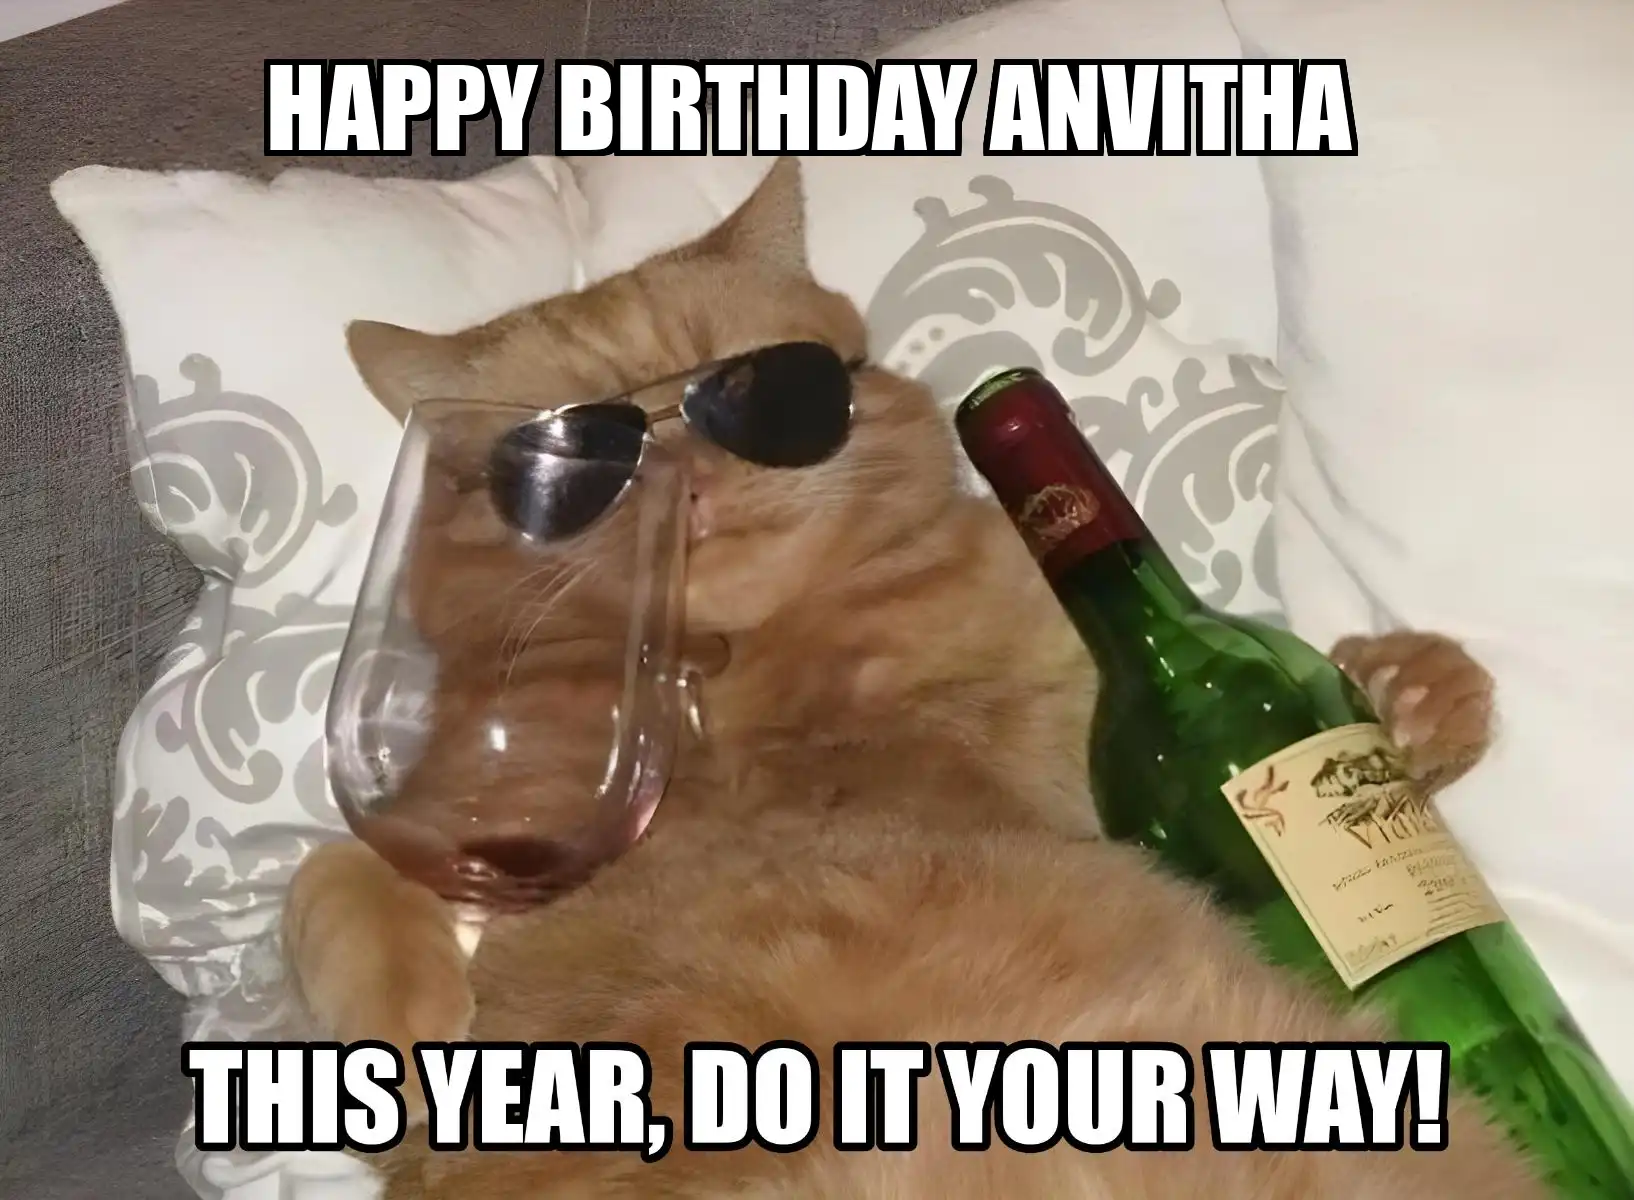 Happy Birthday Anvitha This Year Do It Your Way Meme